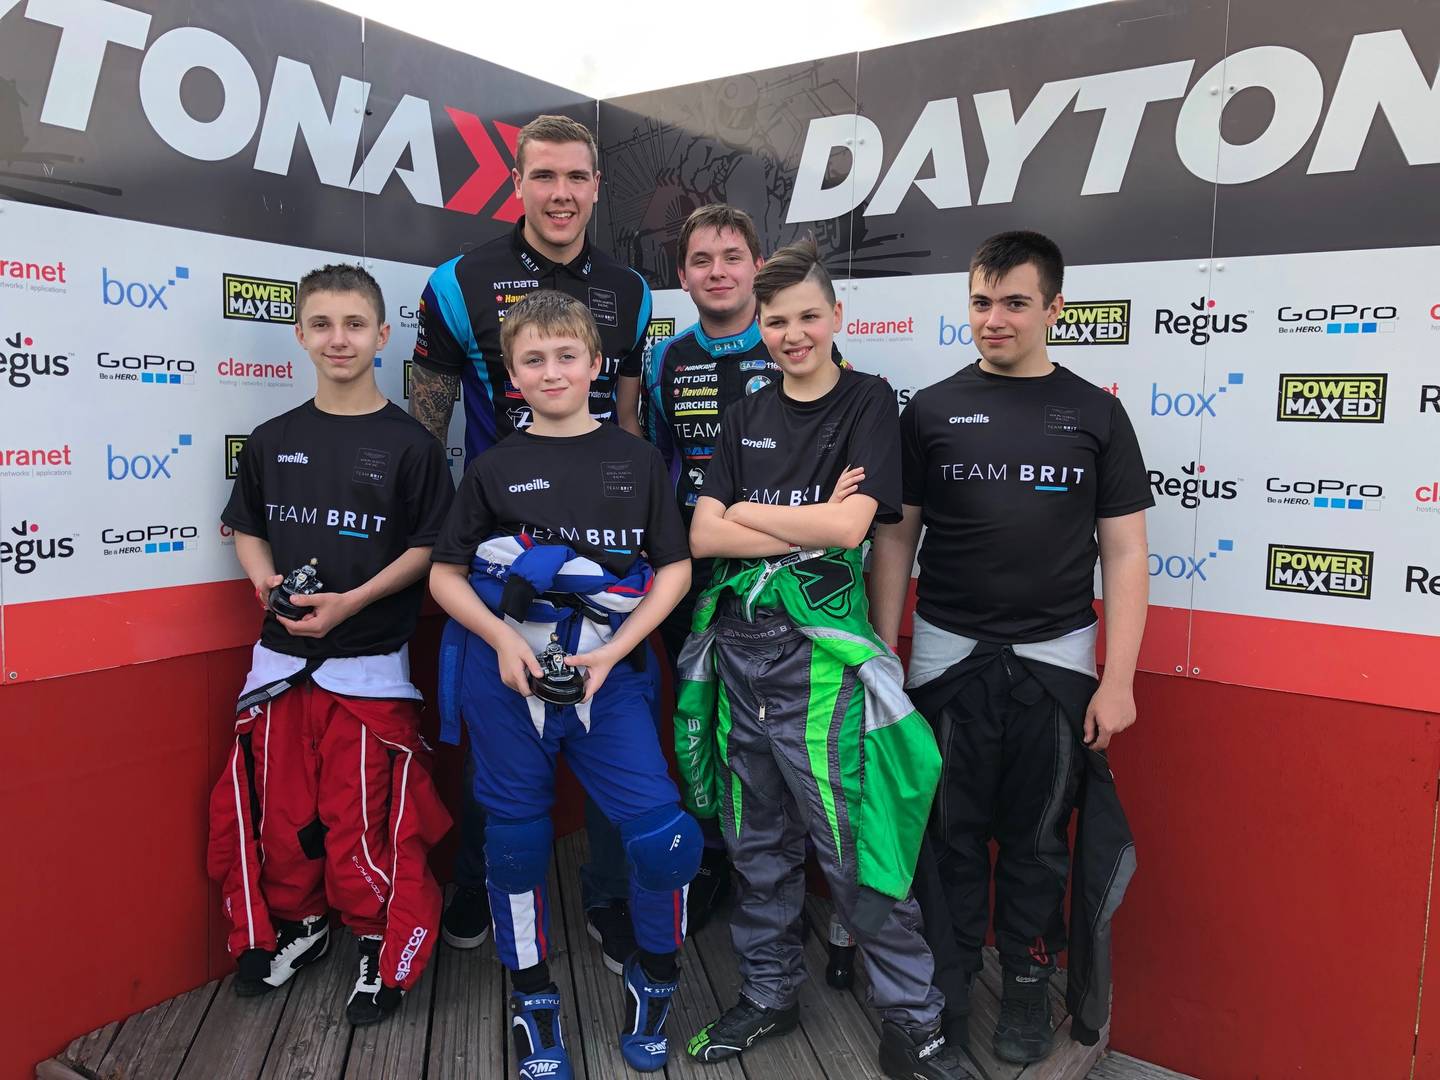 Racing with Autism team standing together after karting event